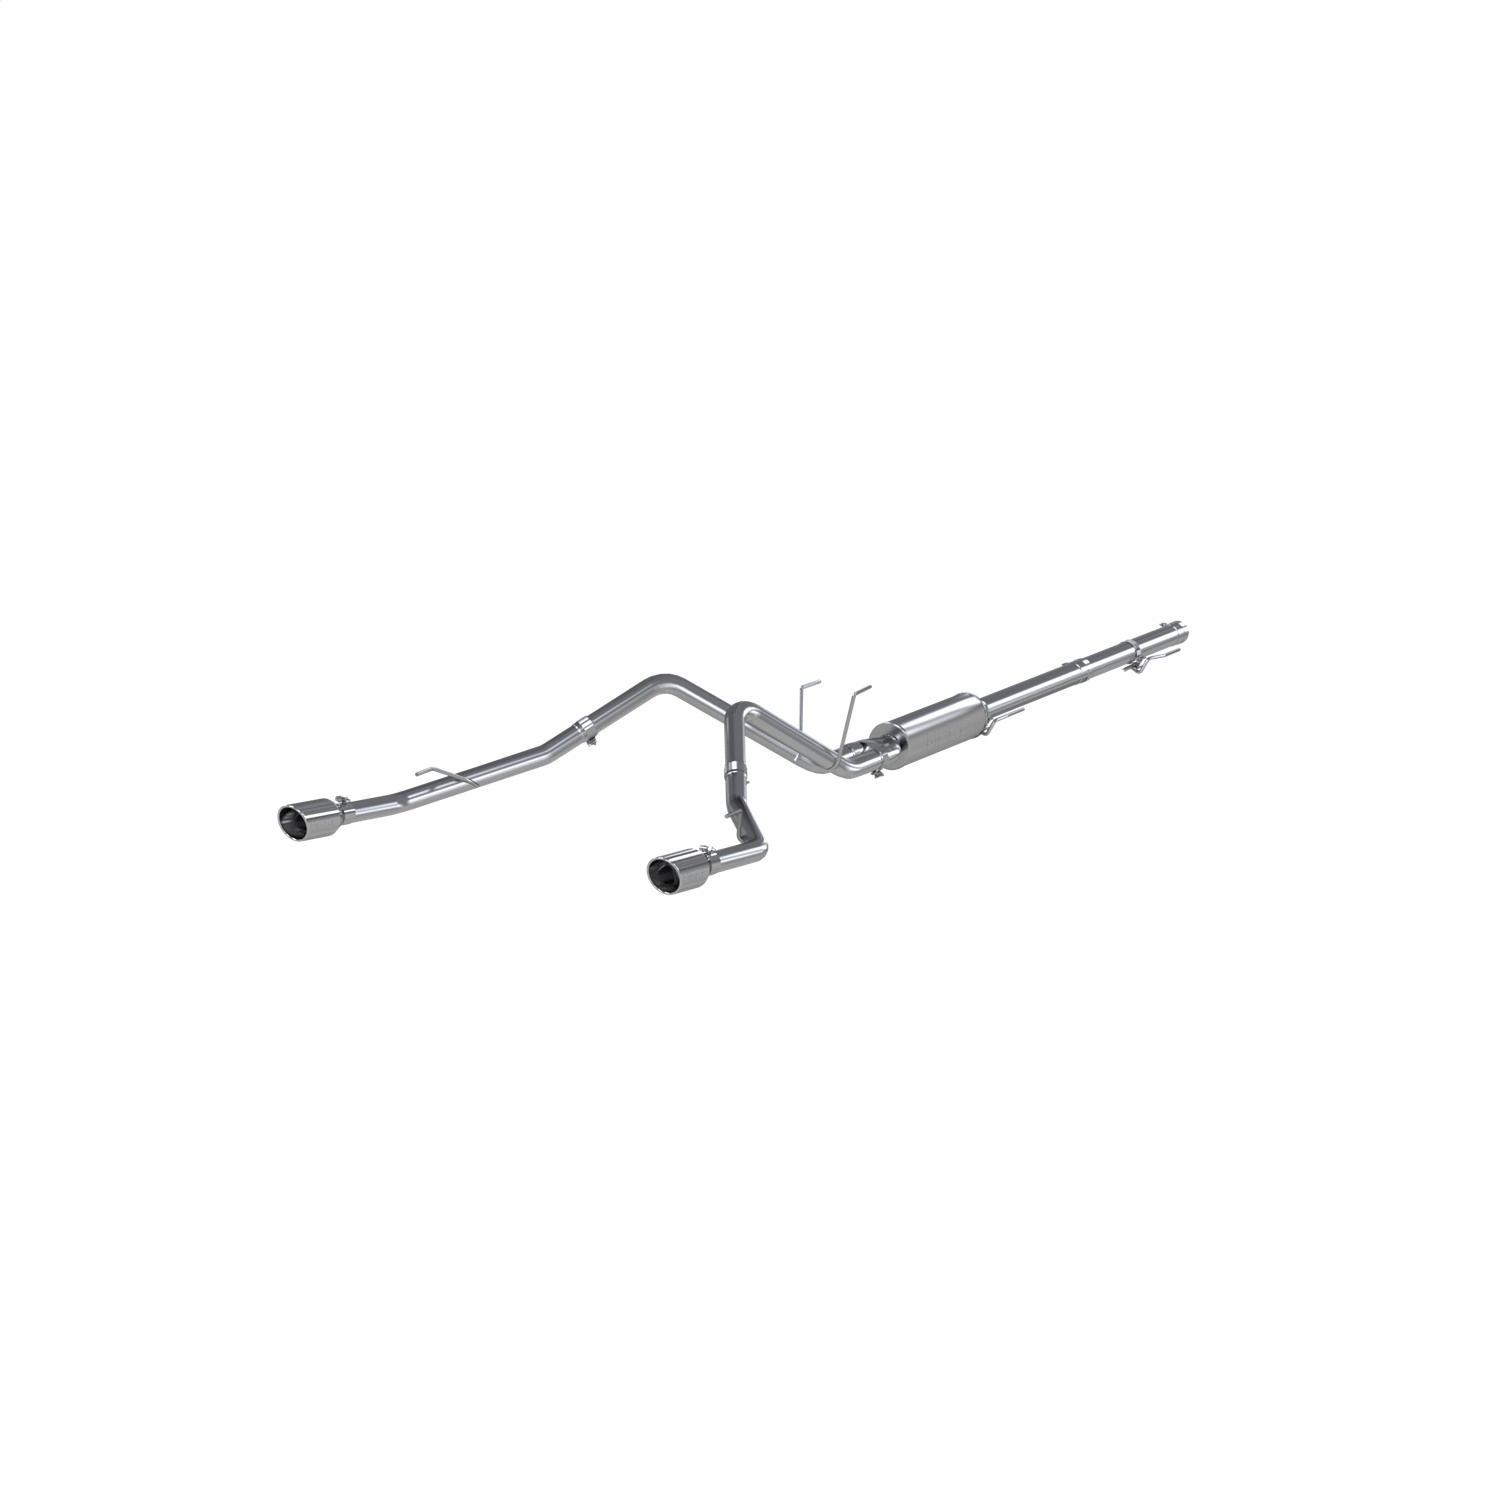 2010 Dodge Ram 1500 Exhaust System Kit in Canada - Canada 2010 Dodge